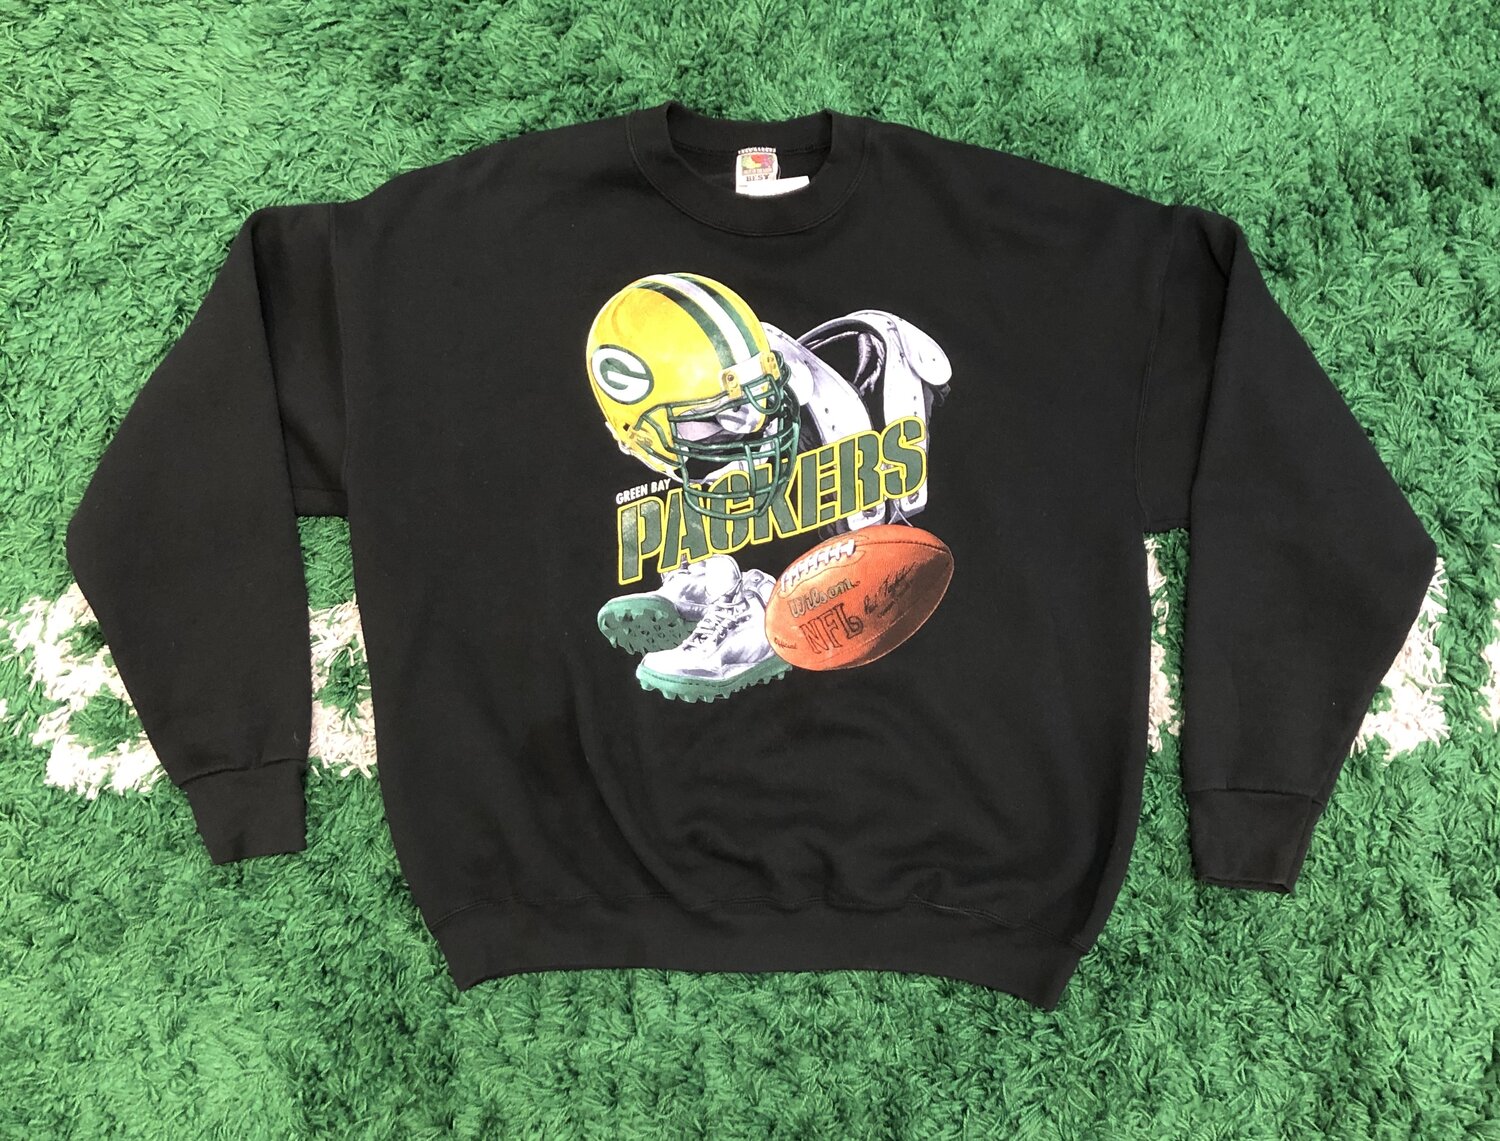 Vintage 1995 Green Bay Packers T-shirt